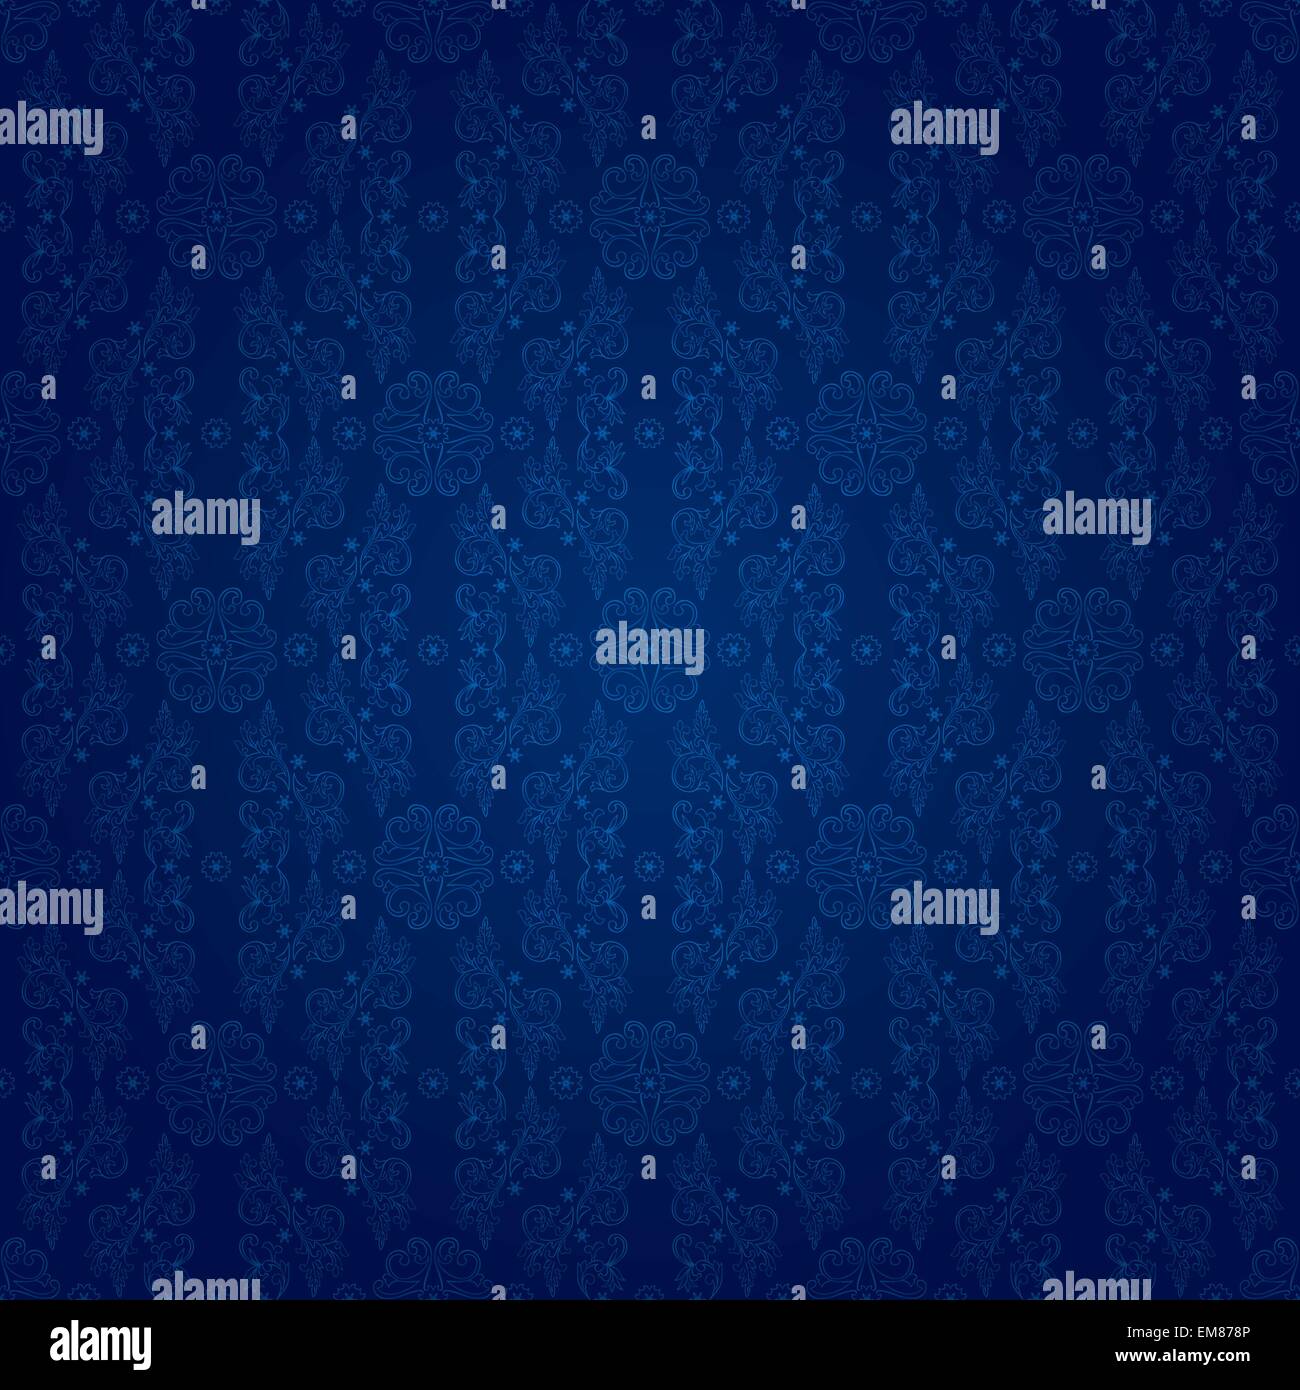 Vintage floral seamless pattern on blue Stock Vector